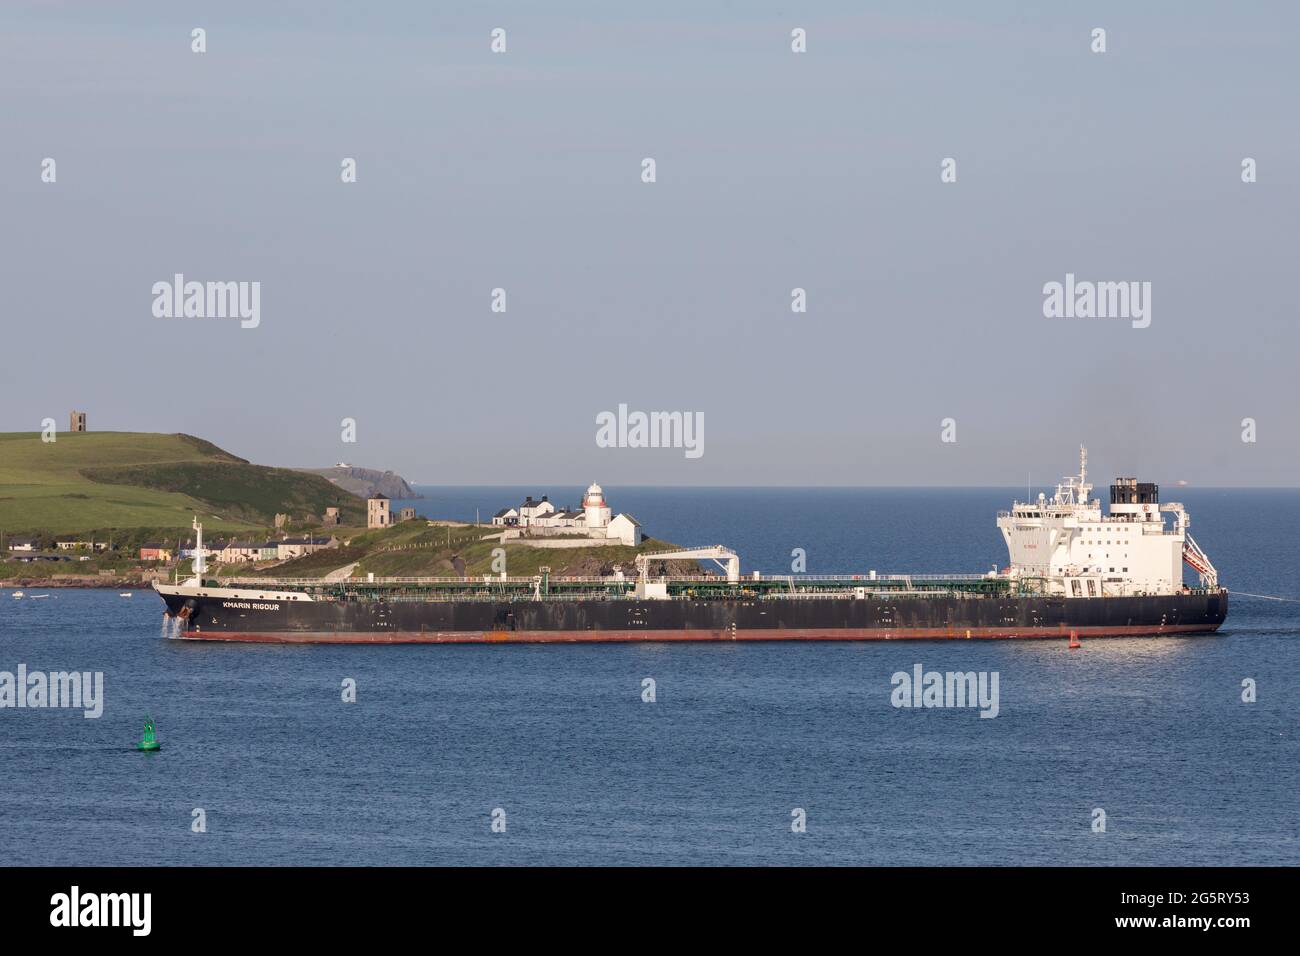 Cork Harbour, Cork, Ireland. 29th June, 2021. Oil tanker Kmarin Rigour passes Roches Point lighthouse after a voyage from Corpus Christi Texas with a supply of crude for the refinery at Whitegate, Co. Cork, Ireland. - Picture; David Creedon / Alamy Live News Stock Photo